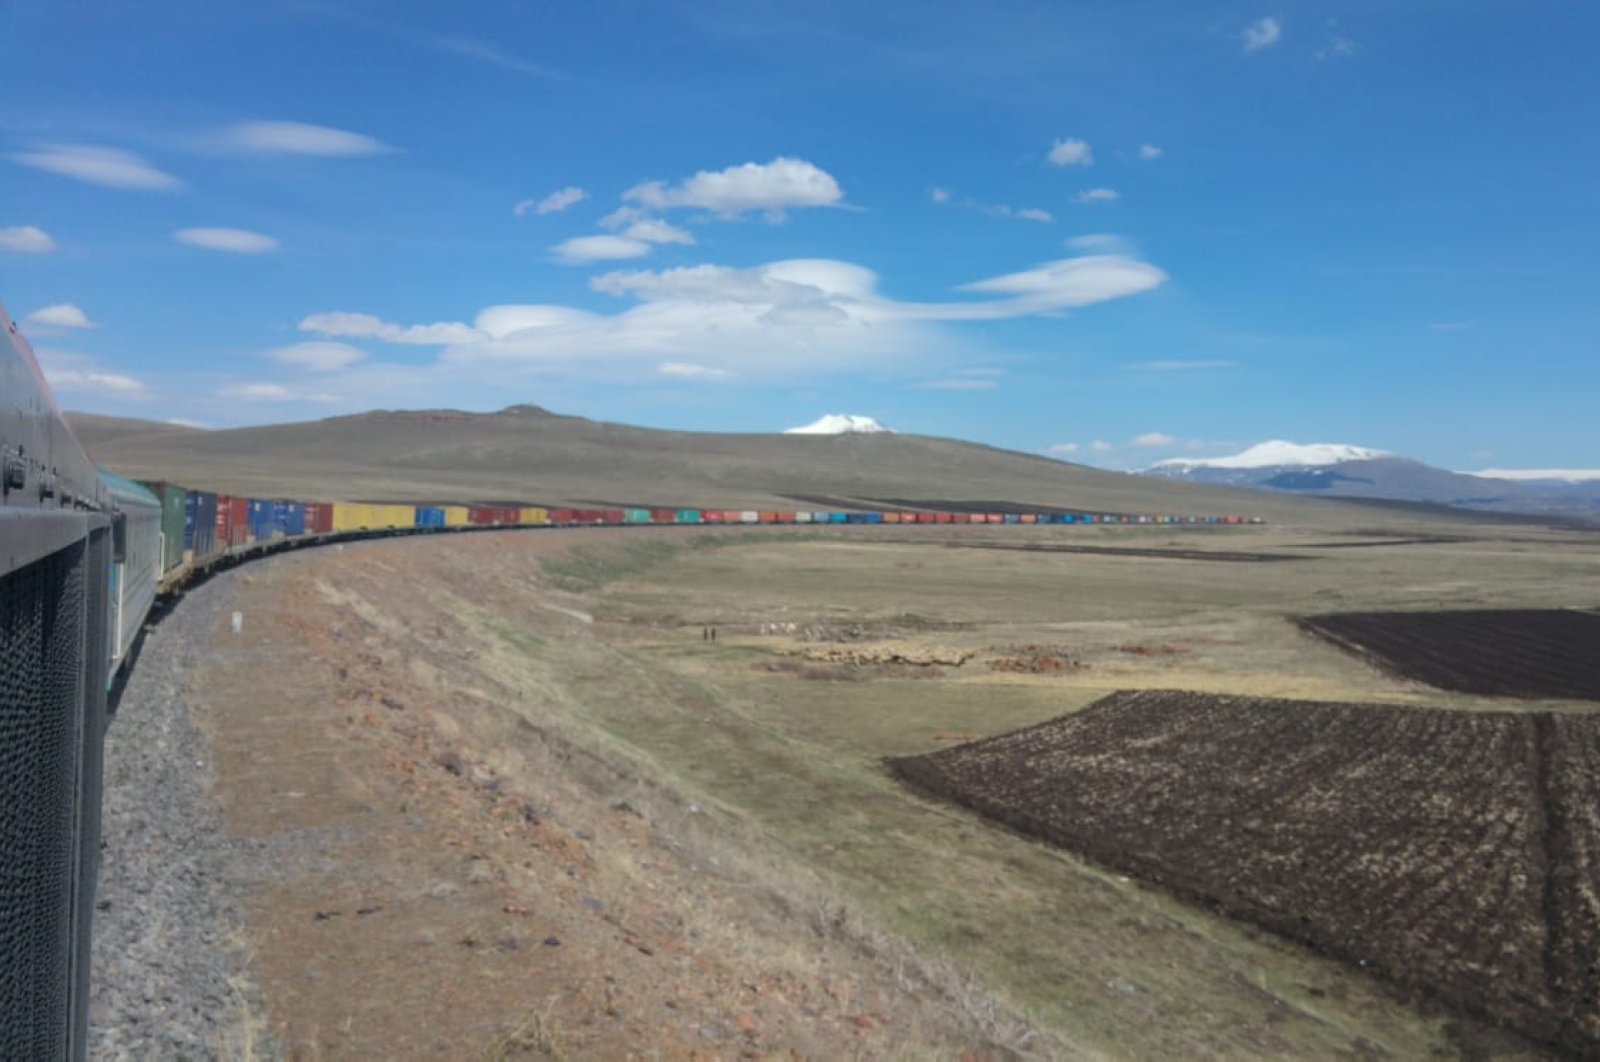 travel central asia by train